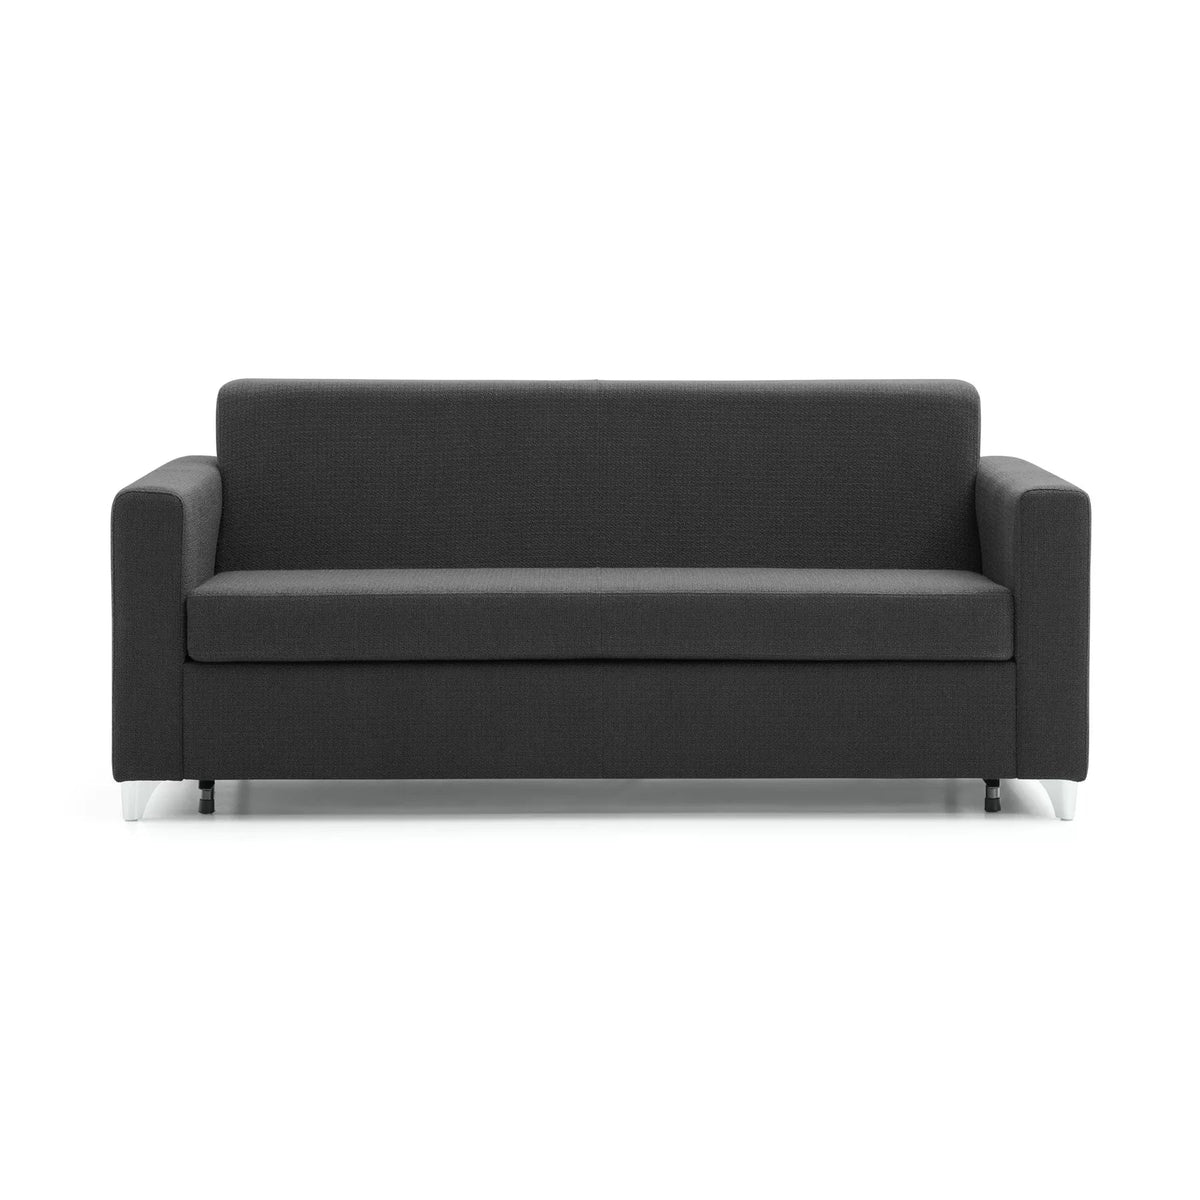 Odin 885 Sofa Bed-TM Leader-Contract Furniture Store